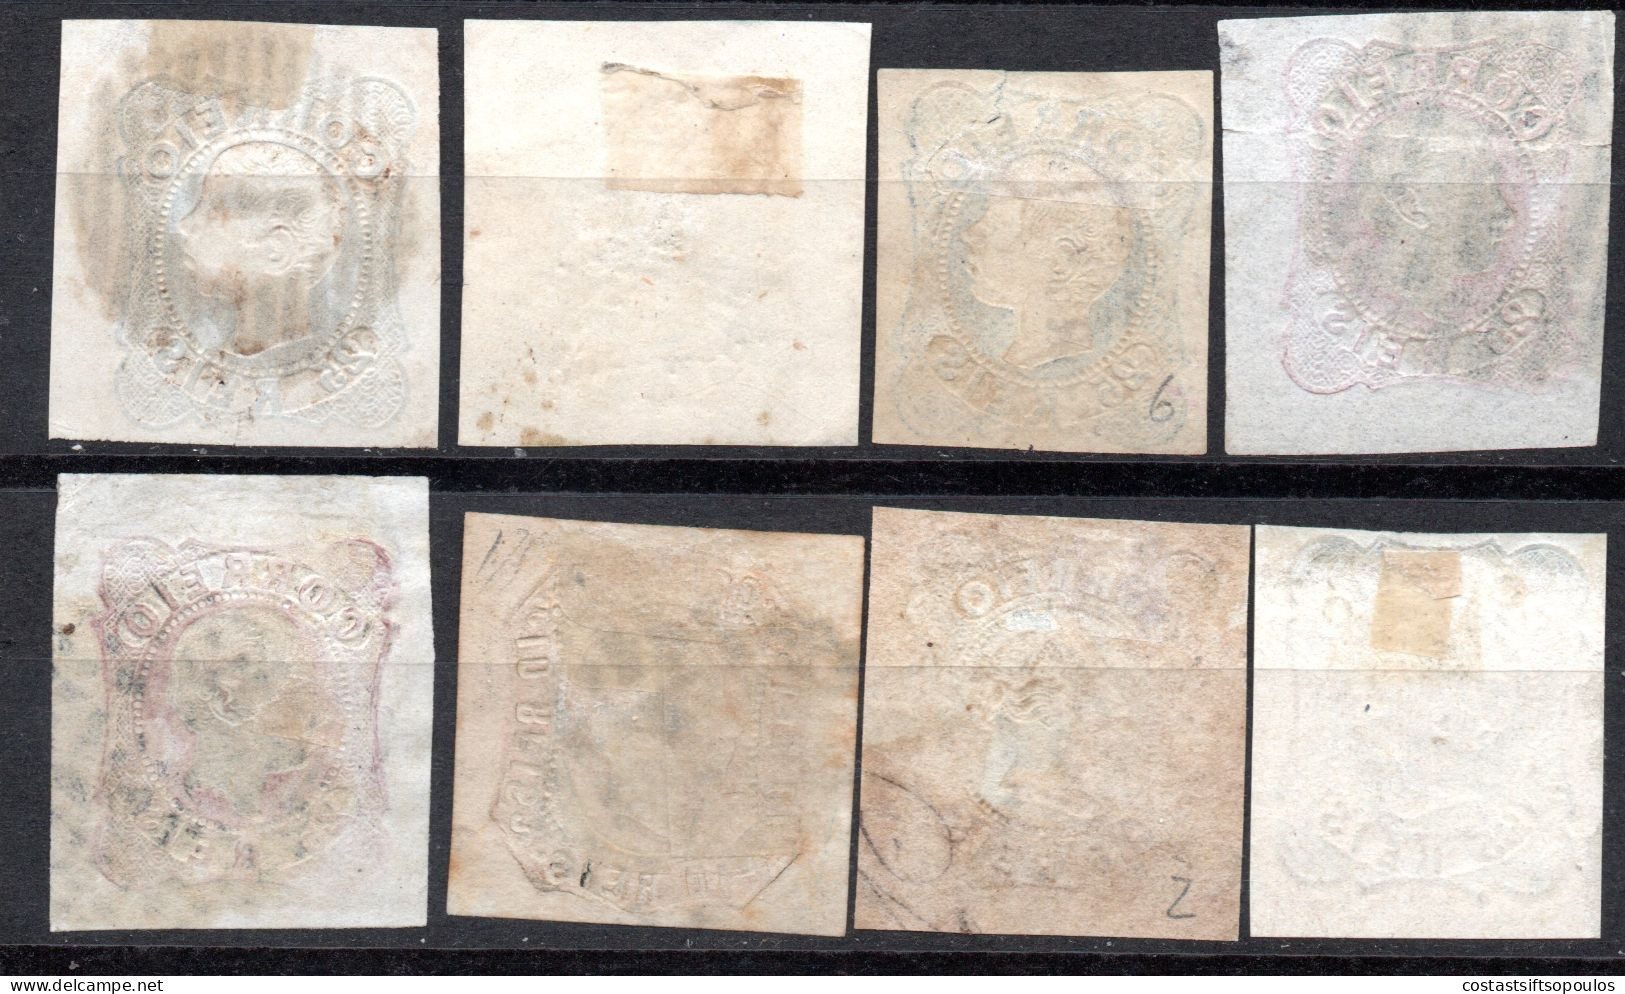 1825. PORTUGAL 32 CLASSIC STAMPS LOT, SOME NICE POSTMARKS. SOME WITH FAULTS. 9 SCANS